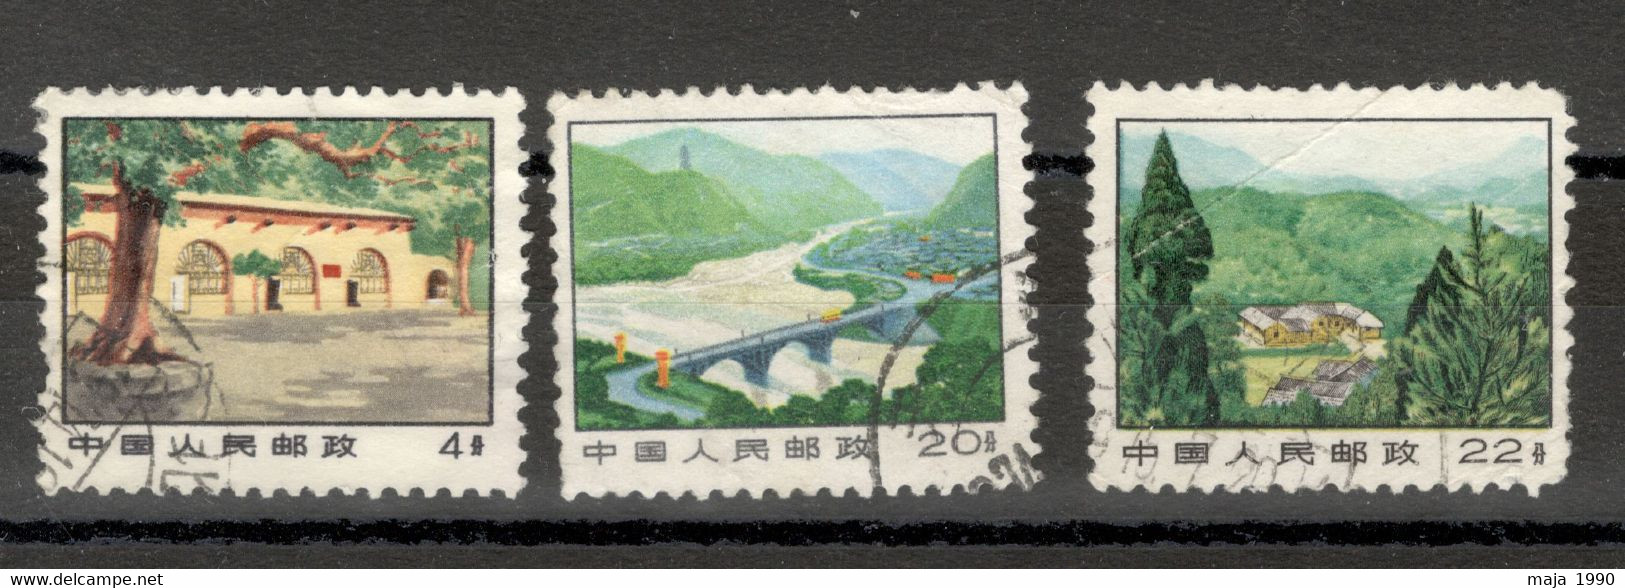 CHINA  - 3 USED STAMPS - REVOLUTIONARY SITES - 1971. - Used Stamps